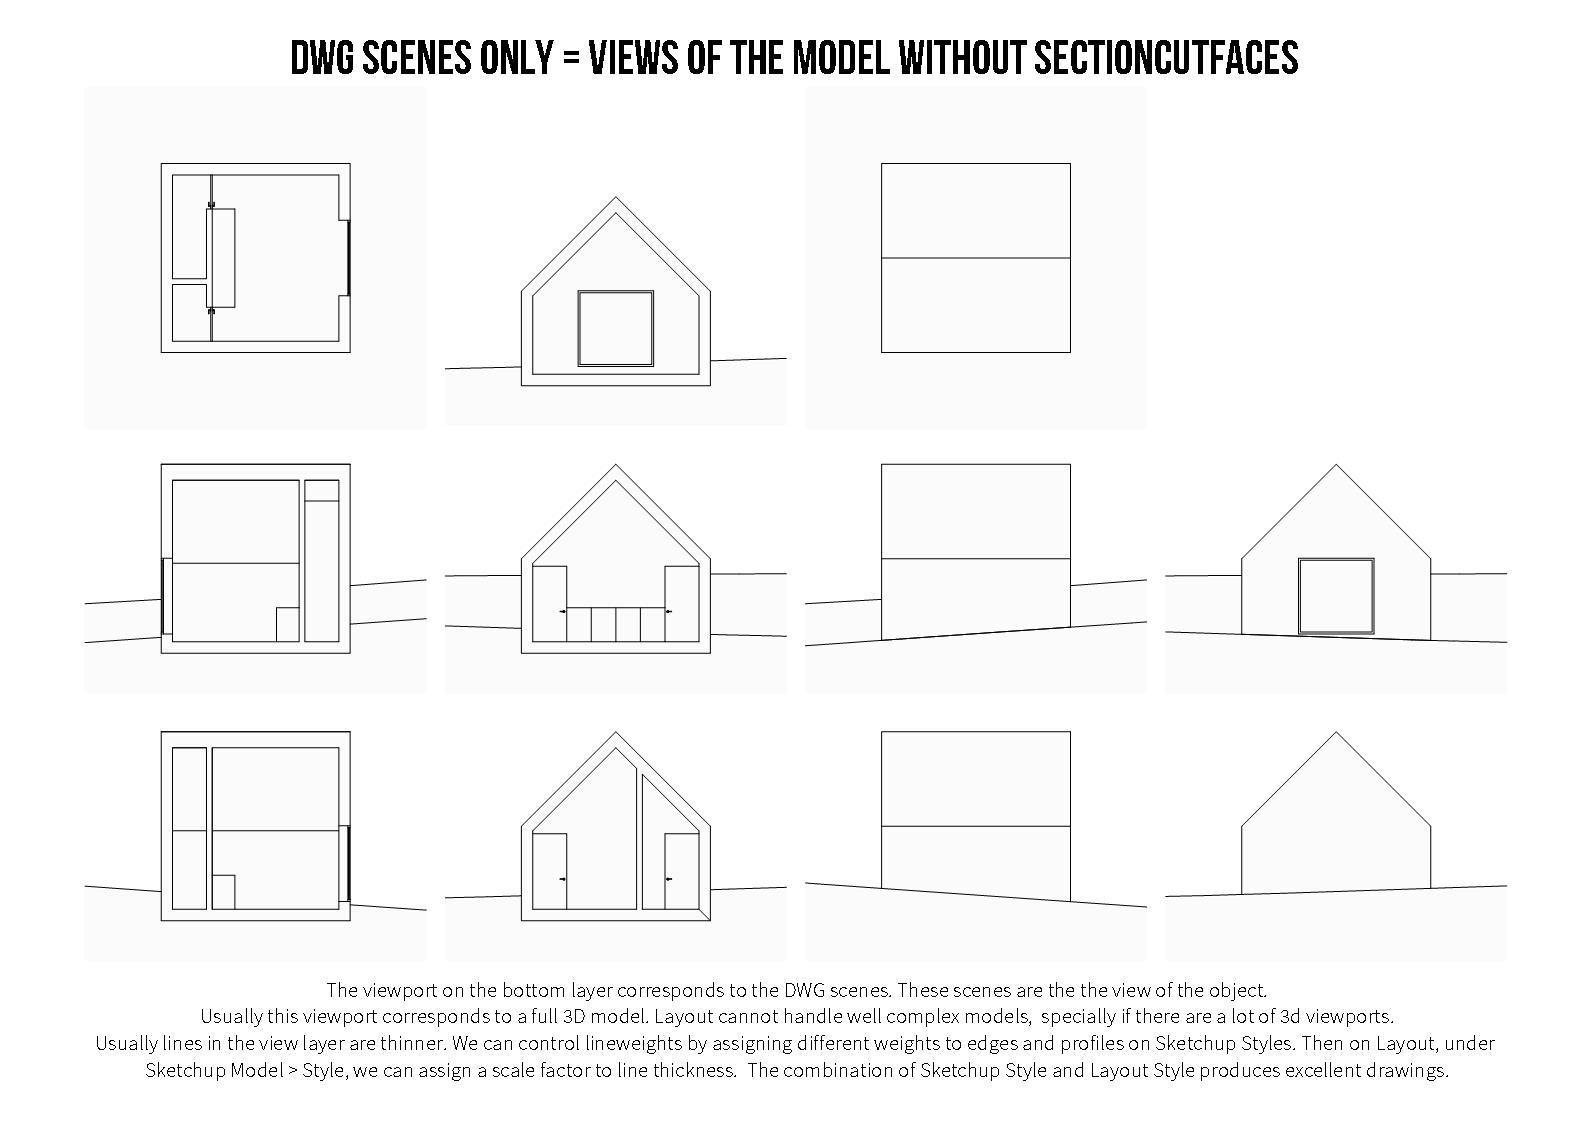 Simple Architectural Layout - DWG Based 2013_4.jpg